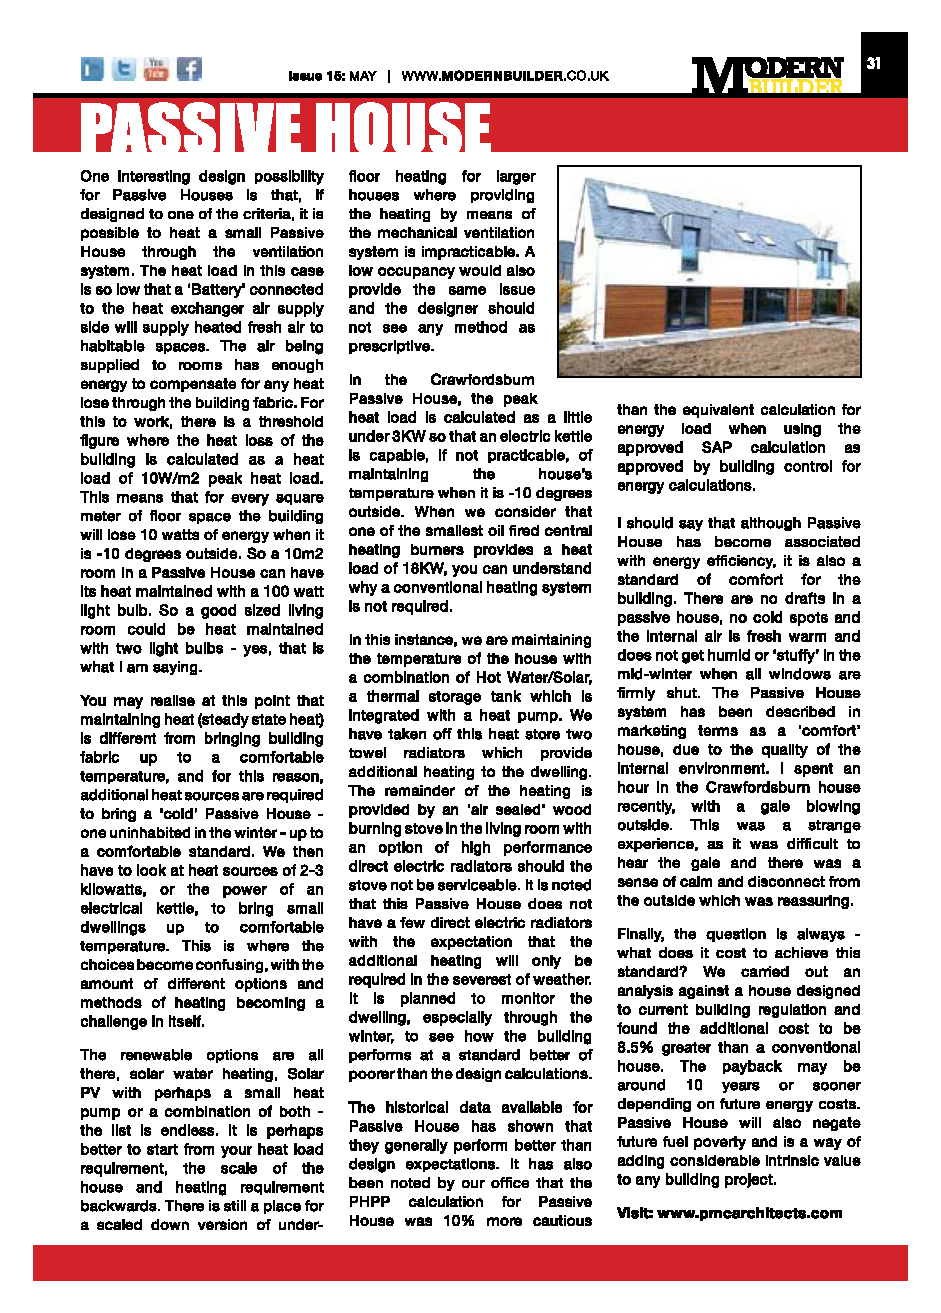 Modern Builder - May 2013_Page_3.png